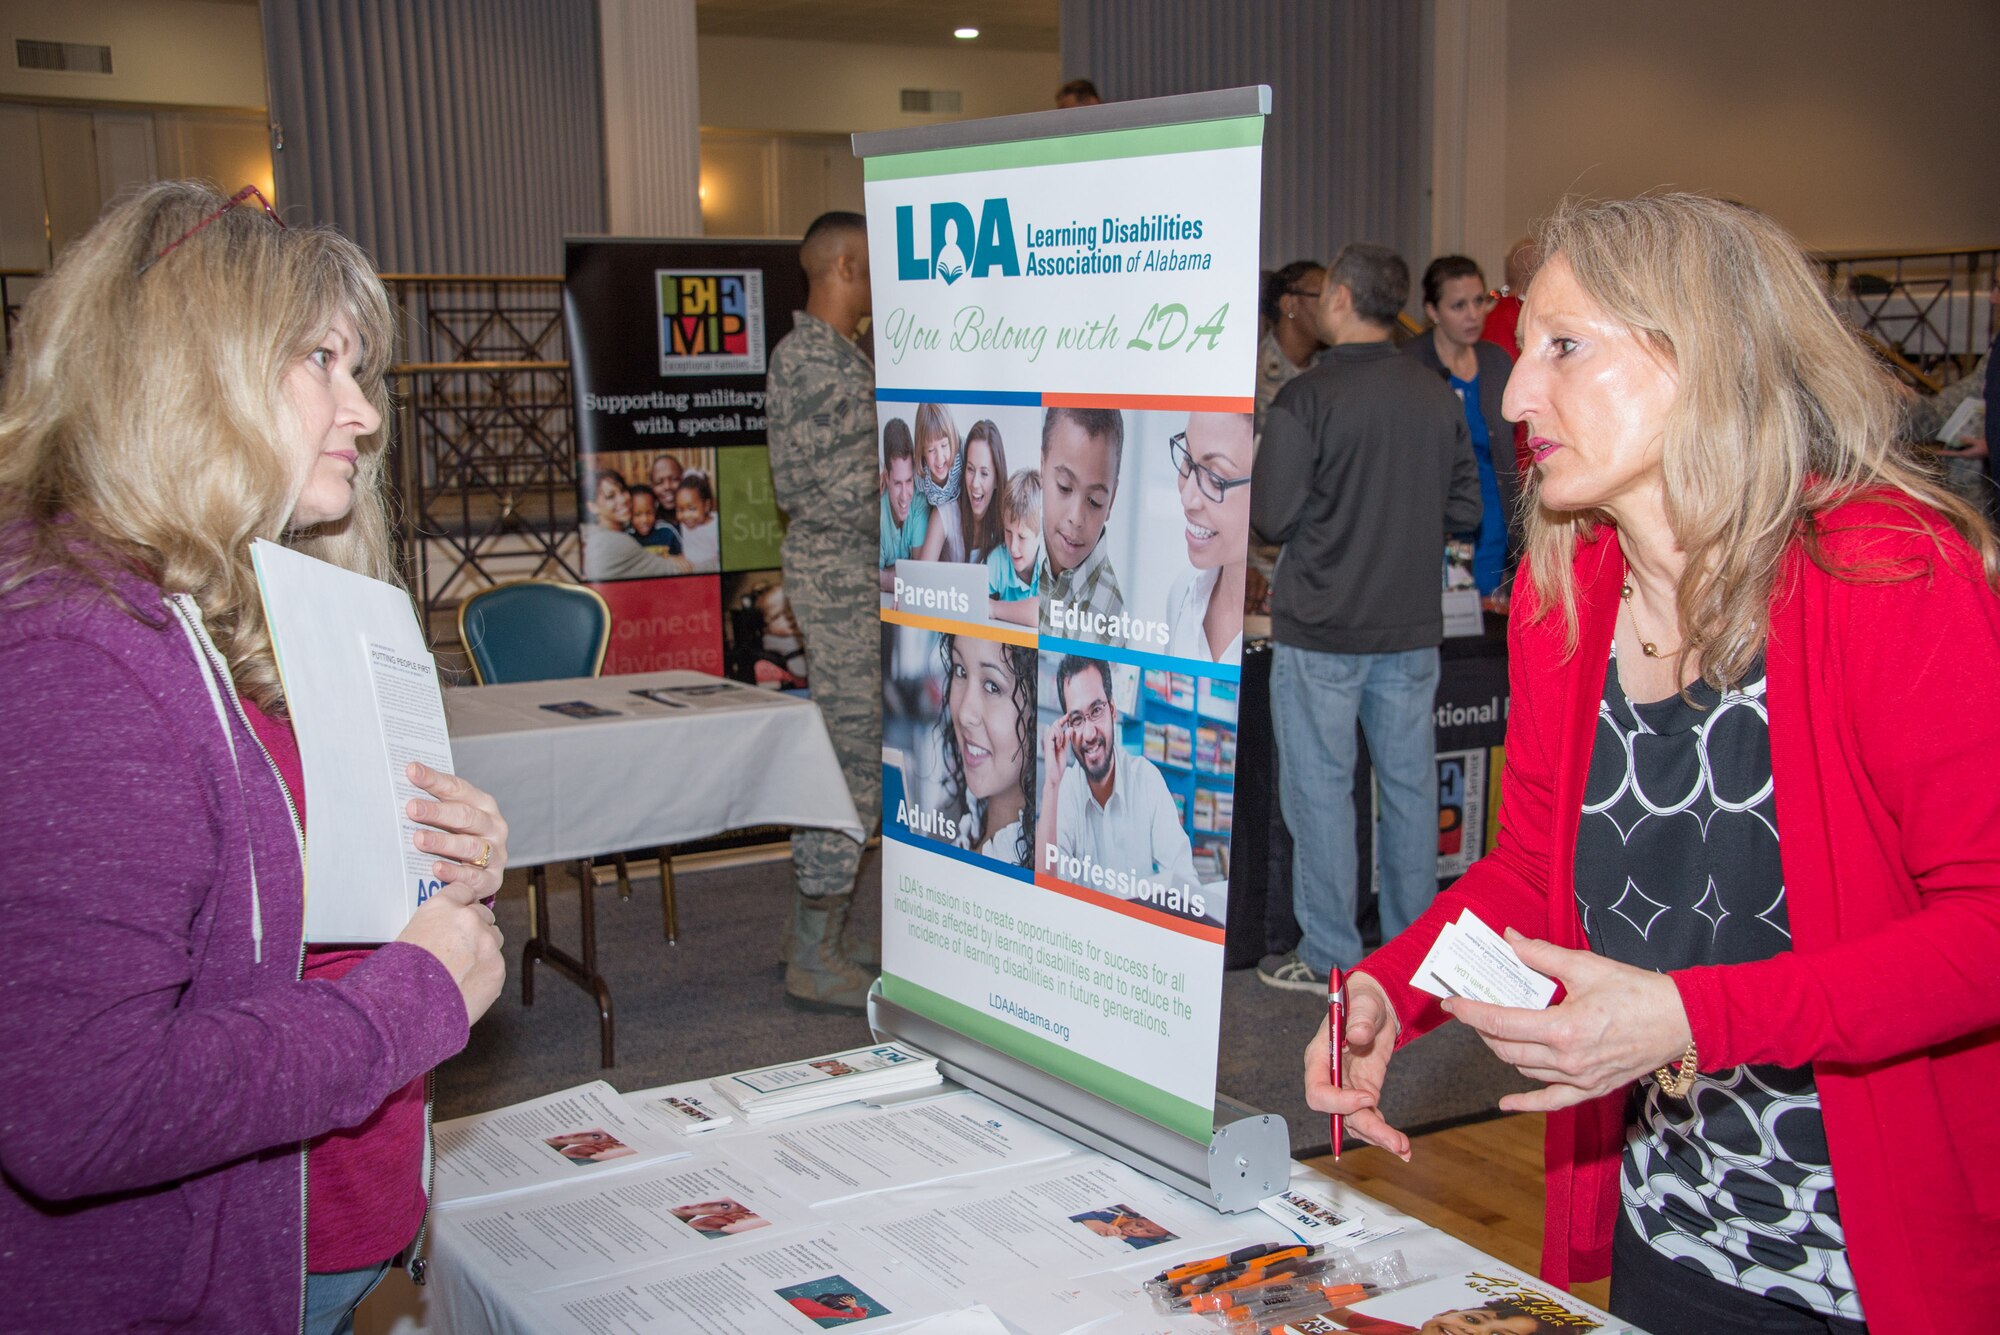 Tamara Massey with the Learning Disabilities Association of Alabama organization talks with a guest at the Exceptional Family Member Program Town Hall and Information Fair, Jan. 31, 2018, at the Maxwell Club. The event drew more than 100 people and 25 on- and off-base EFMP service providers. The town hall was held to share information with EFMP families, friends and coworkers about available services and about the program itself. (U.S. Air Force photo by William Birchfield)